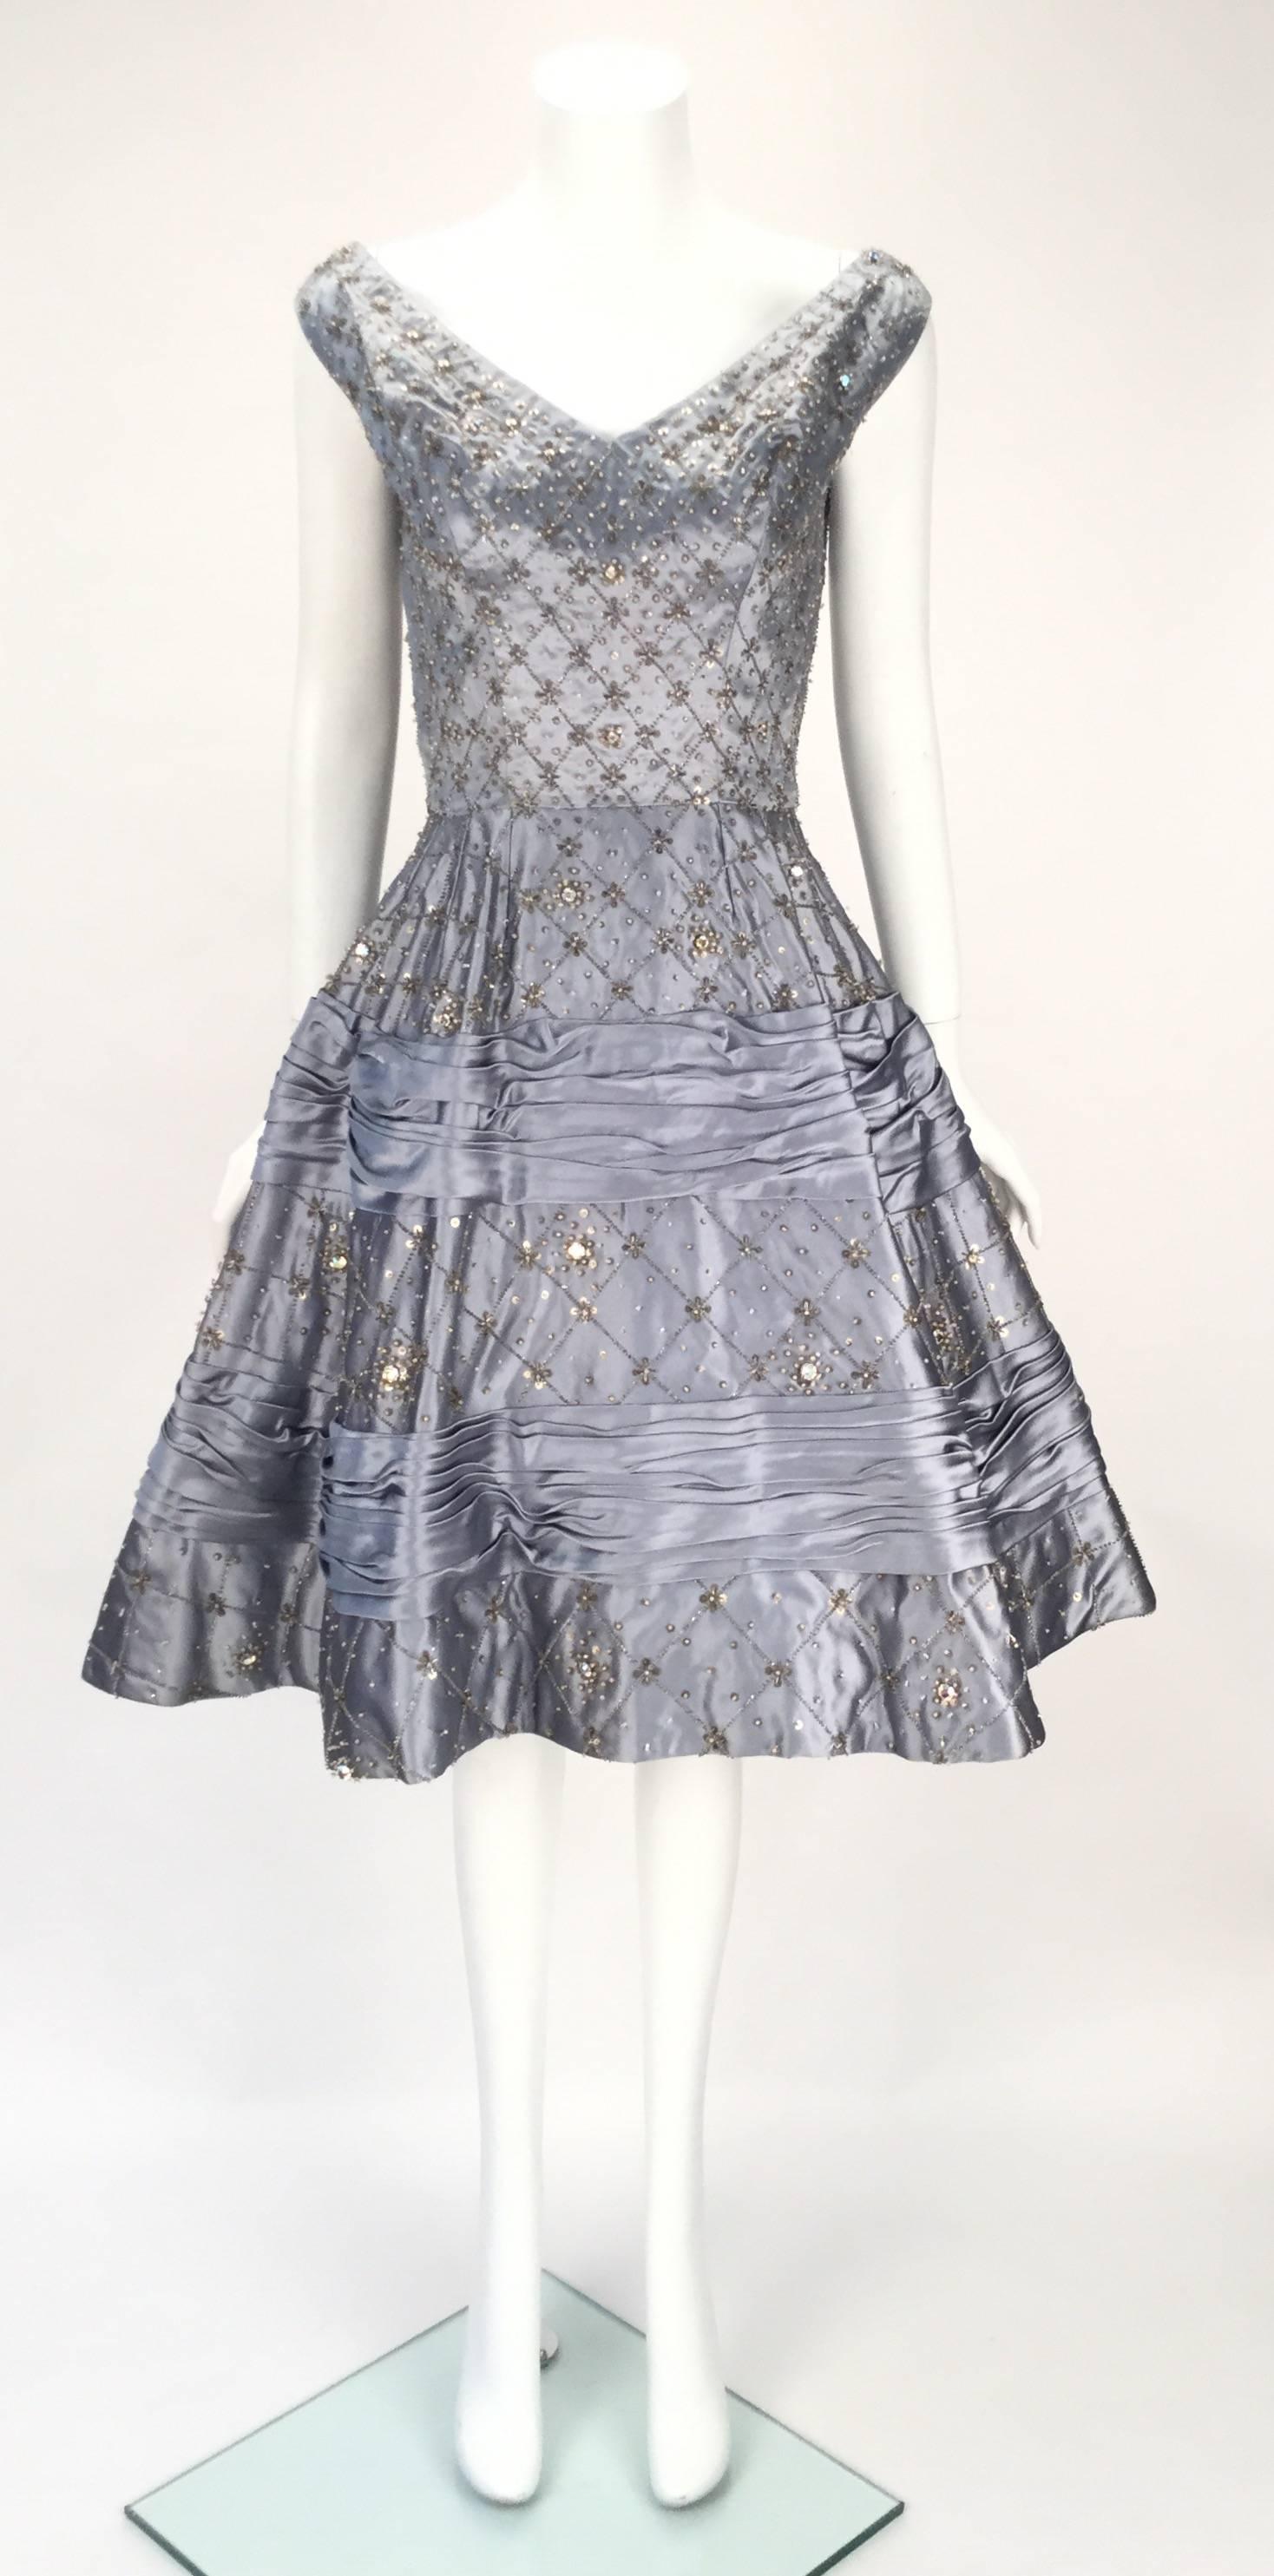 Remarkable 1950's dusty blue satin evening dress with iridescent rhinestone embellishment throughout. The full 